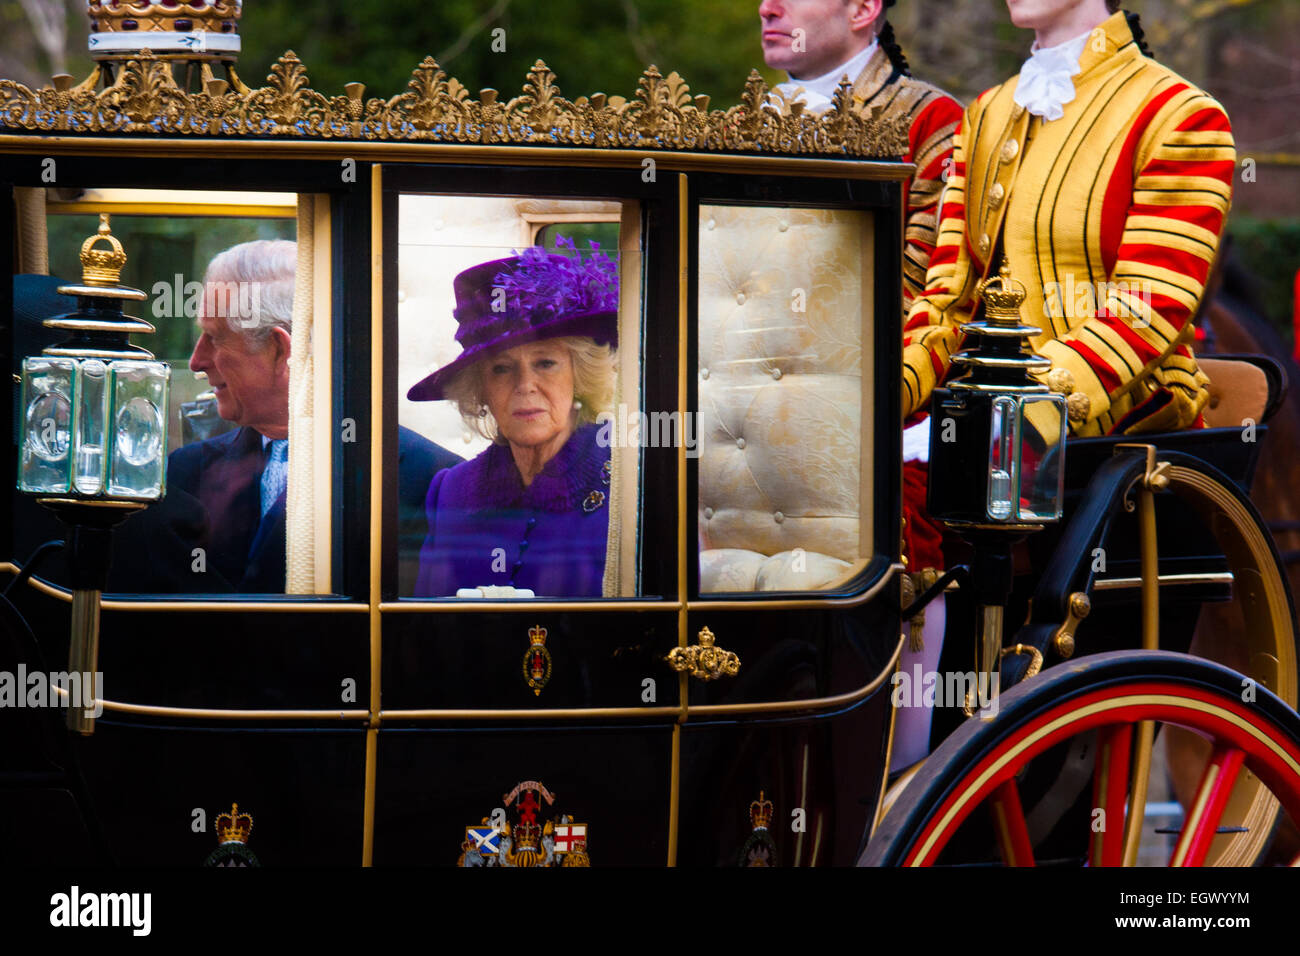 London, UK. 3rd March, 2015. Mexican President Enrique Pena Nieto travels with Her Majesty The Queen and other members of the Royal Family by State Carriage along the Mall towards a luncheon at Buckingham Palace after a ceremonial welcome at Horseguards Parade. PICTURED: Prince Charles and Camilla Duchess of Cornwall. Credit:  Paul Davey/Alamy Live News Stock Photo